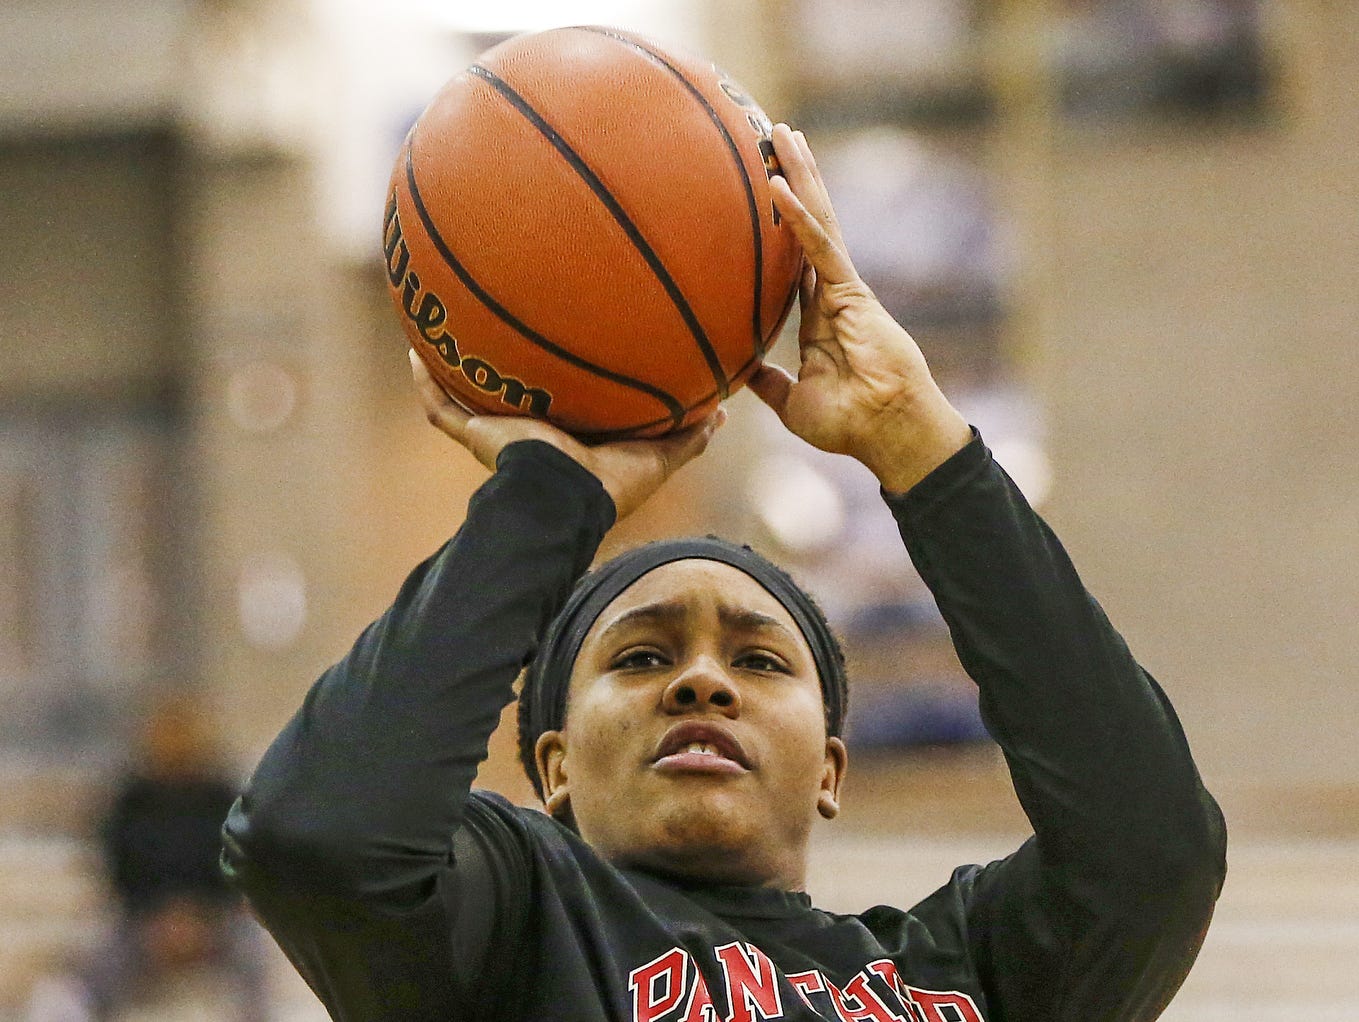 North Central Panthers' Ajanae' Thomas (34) warms up before the Panthers' game at Carmel High School on Dec. 16, 2016.